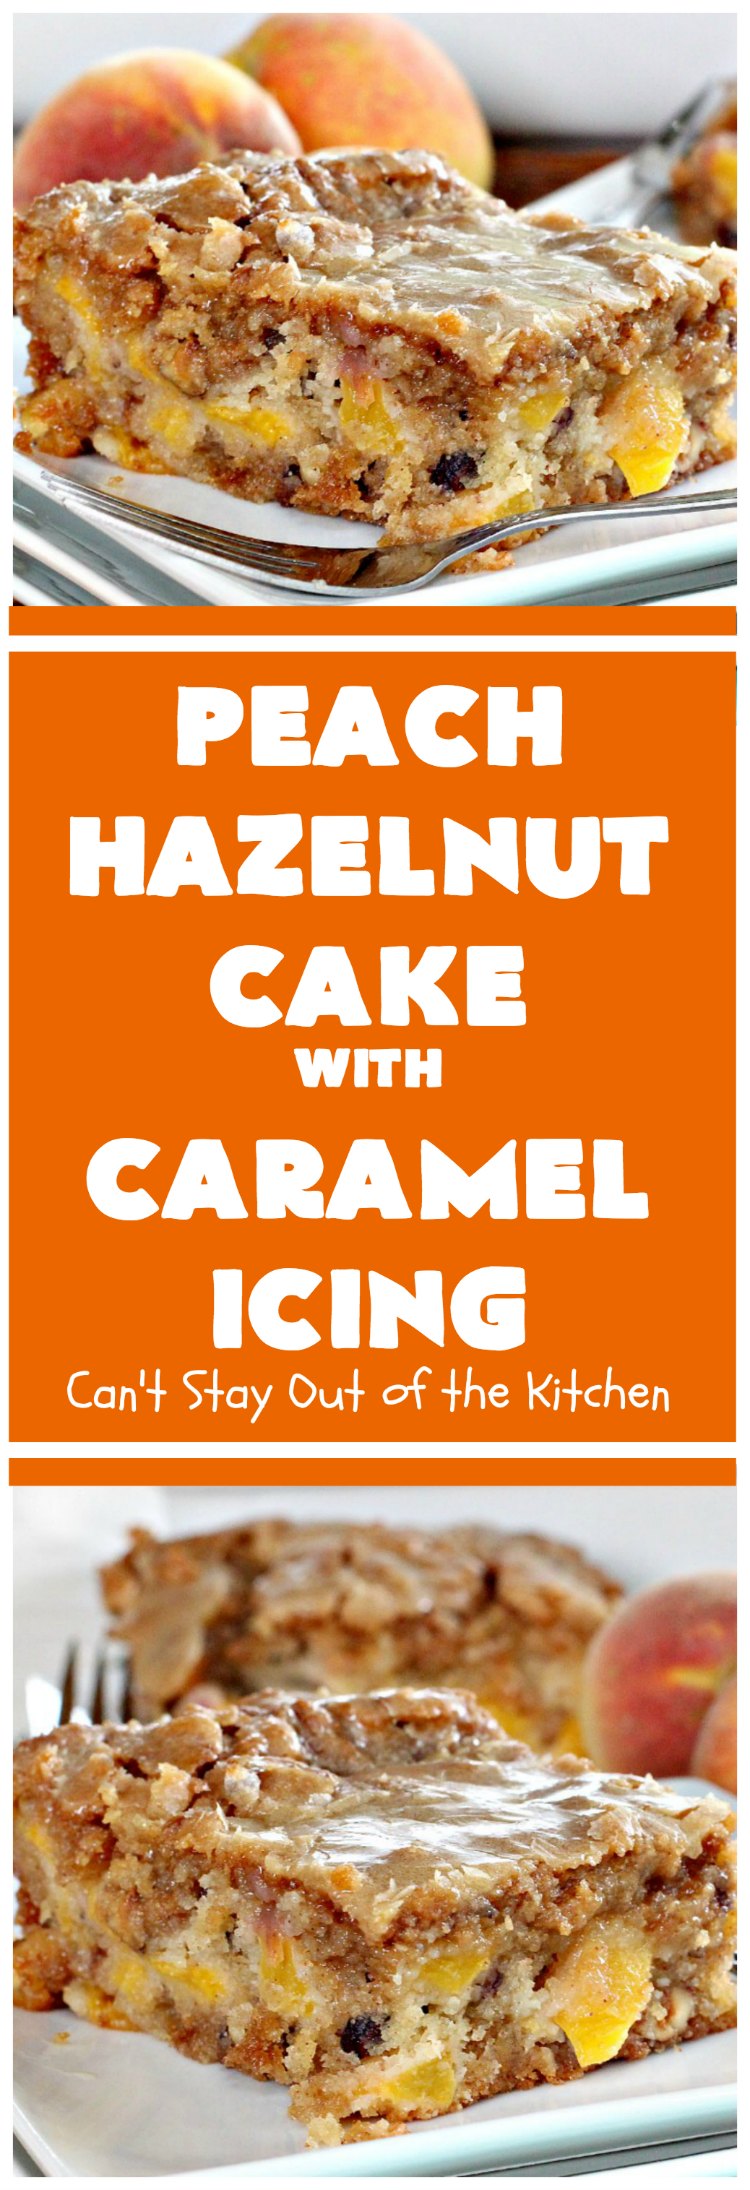 Peach Hazelnut Cake with Caramel Icing | Can't Stay Out of the Kitchen